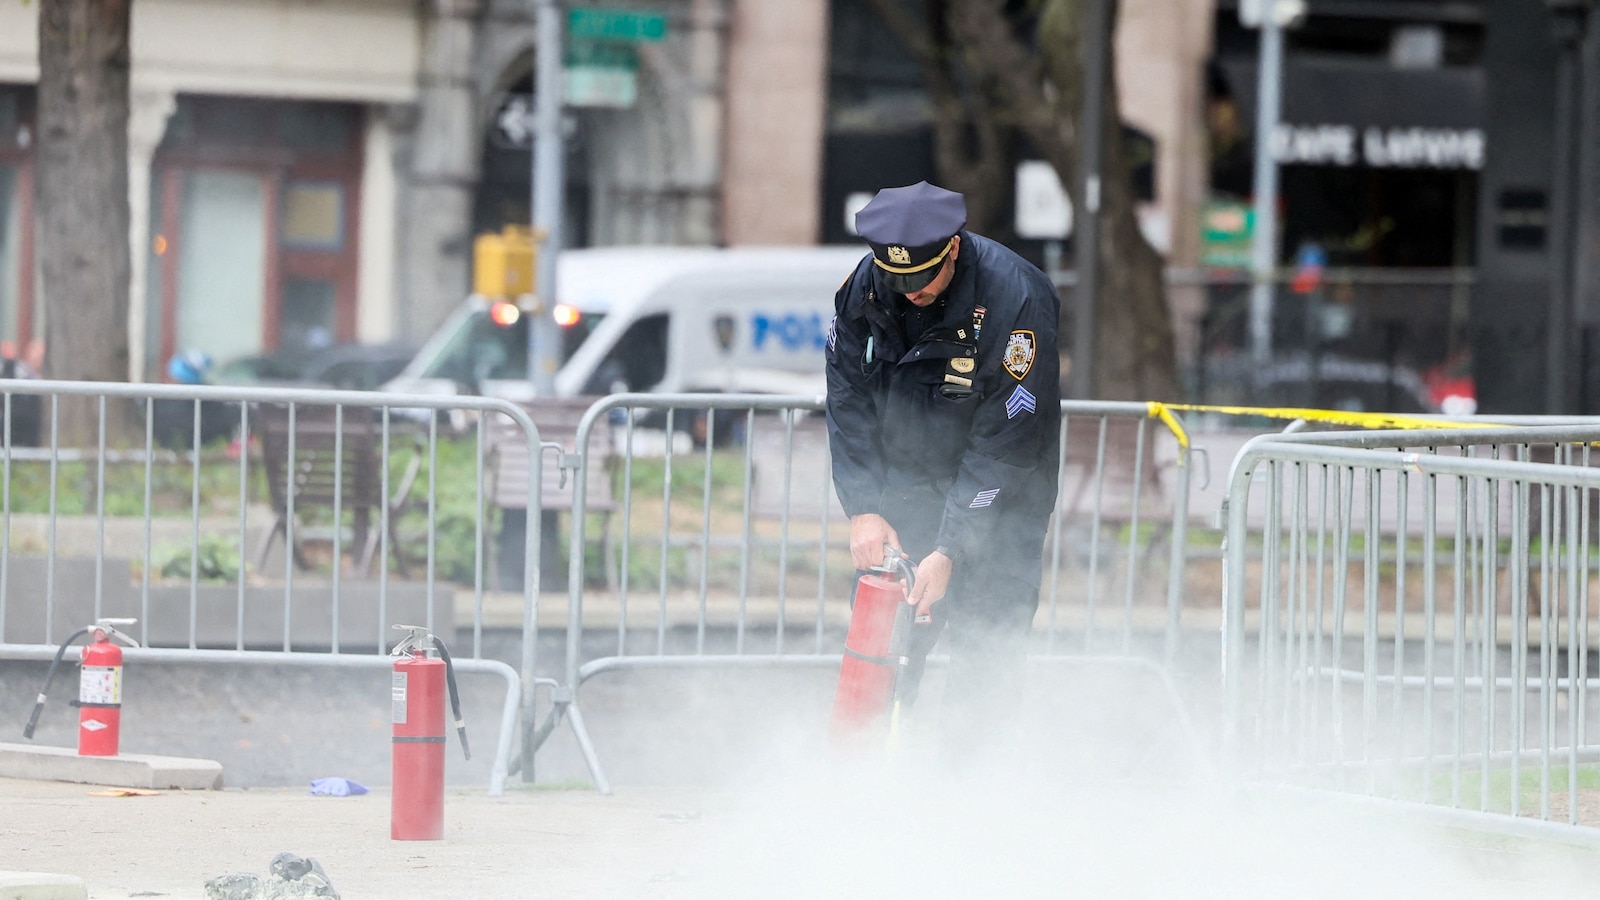 Man sets himself on fire outside courthouse where Trump is on trial